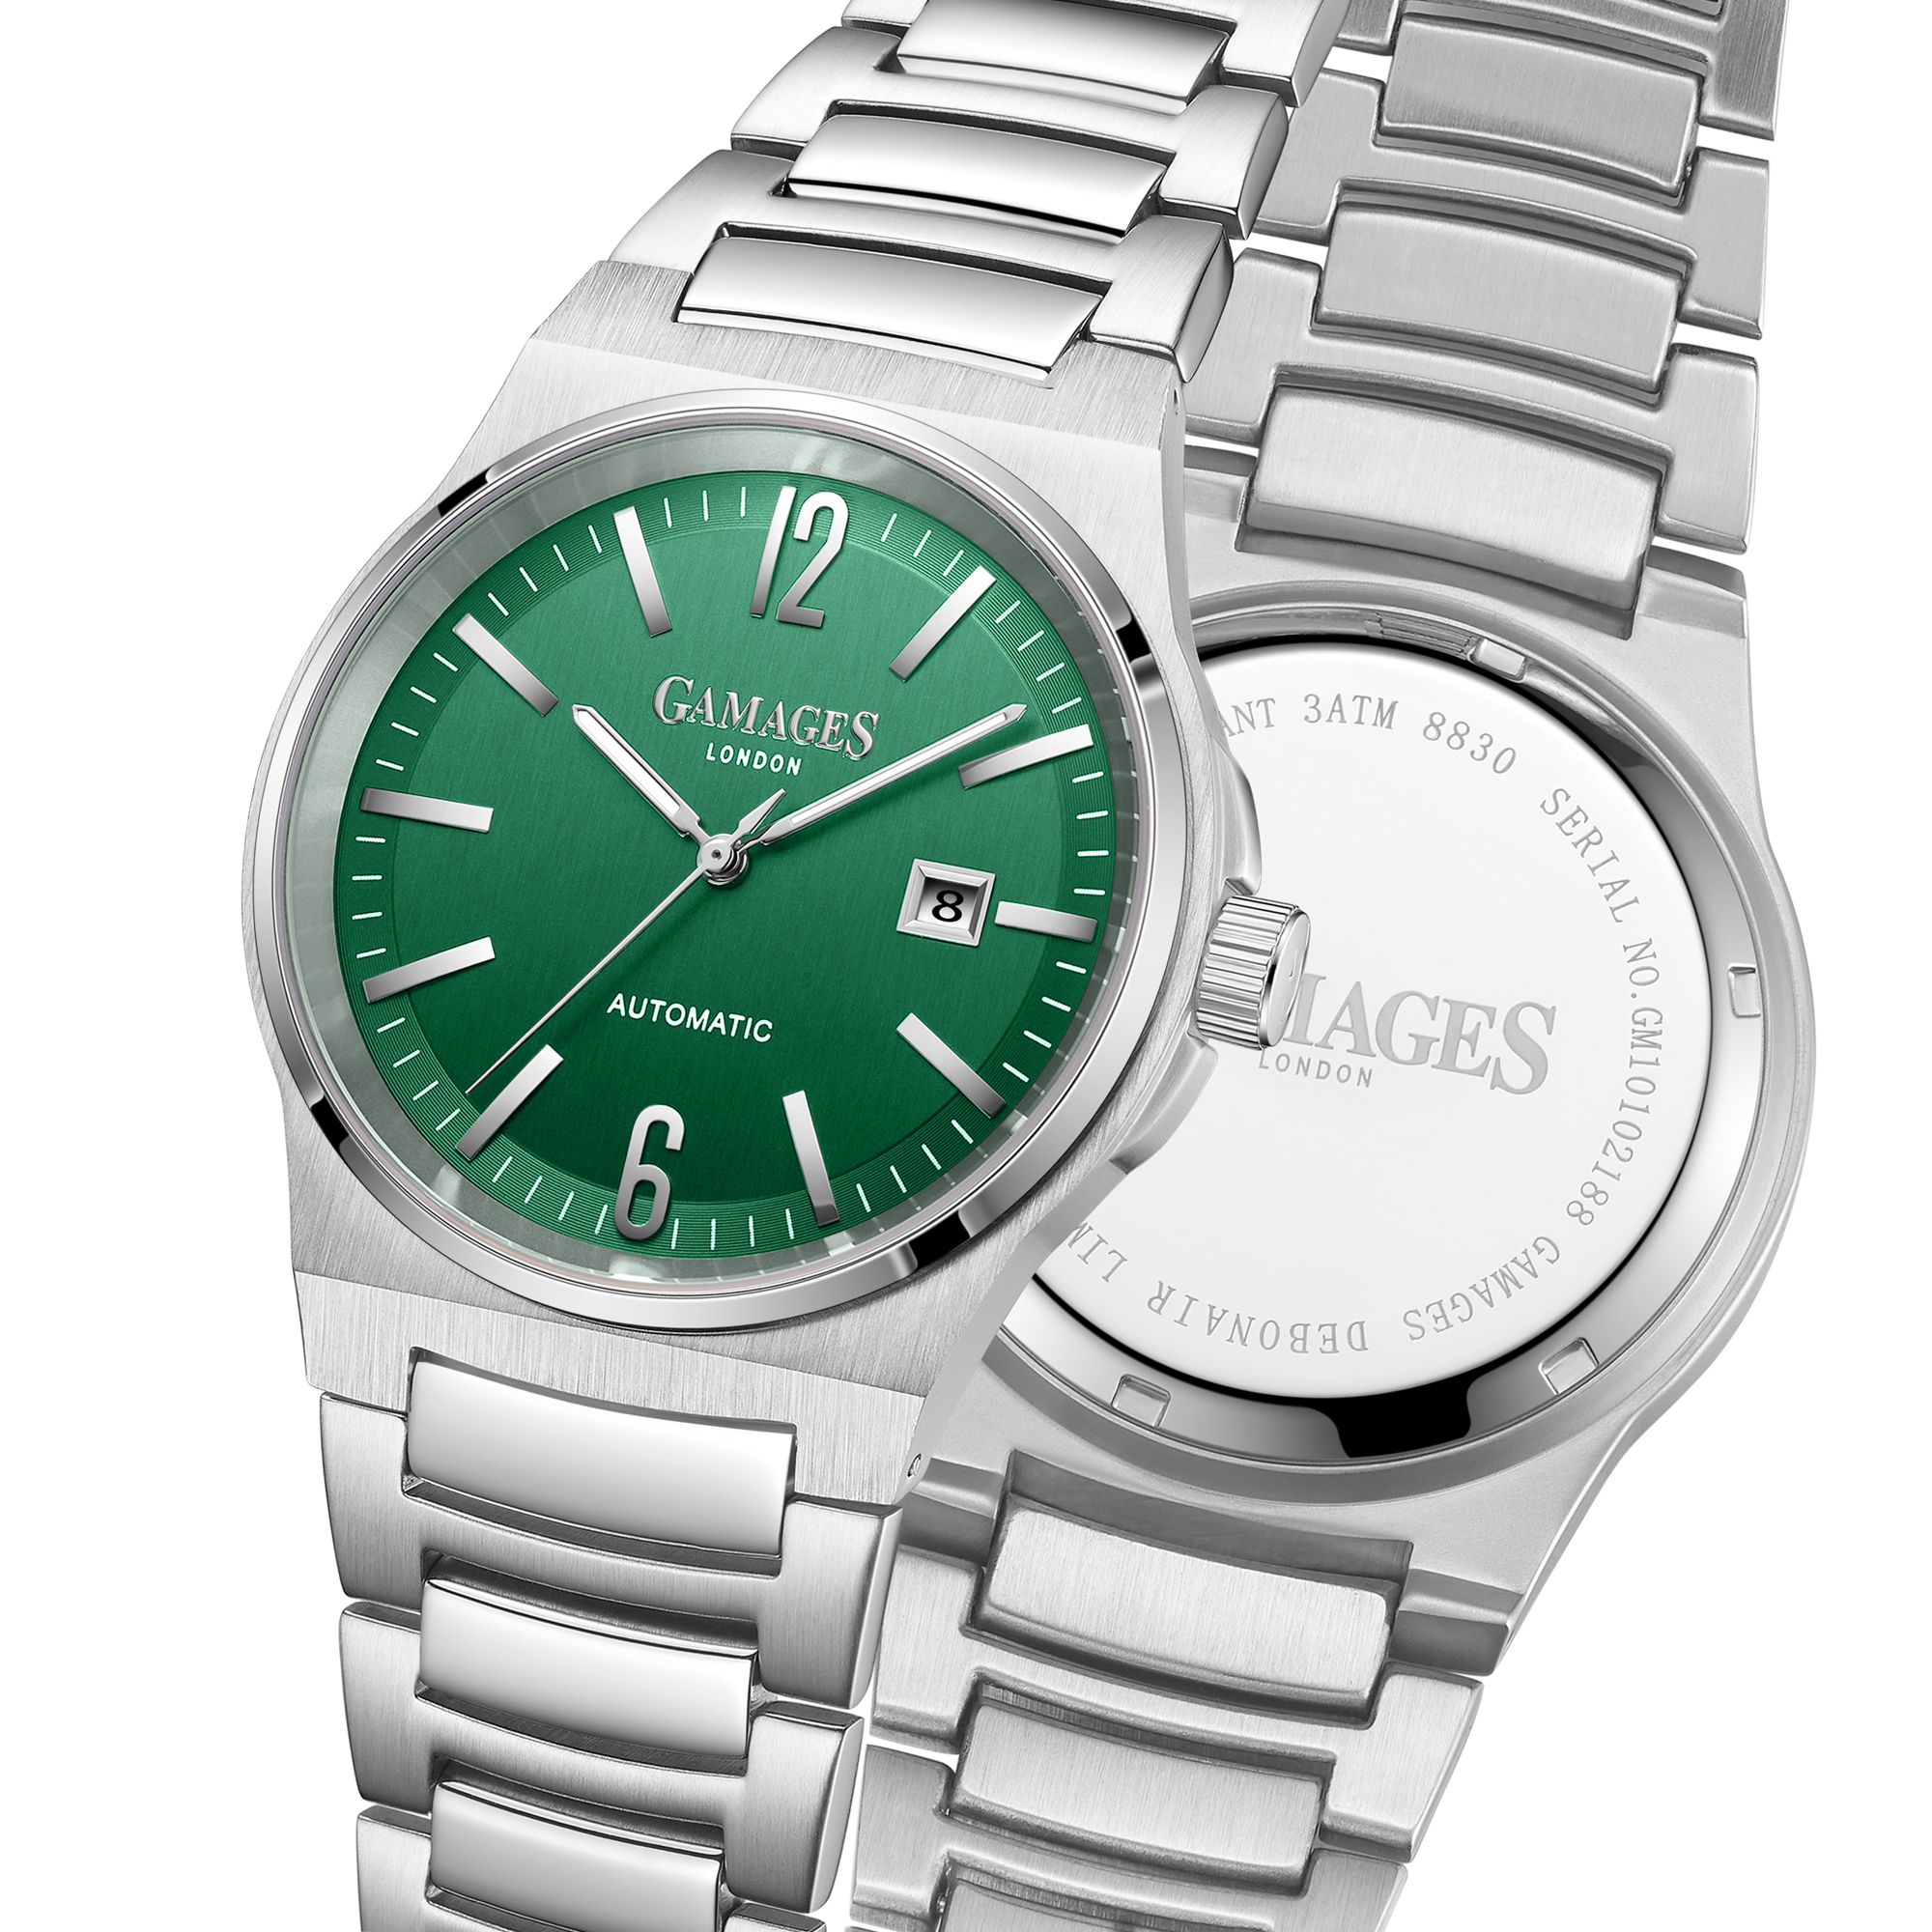 Limited Edition Hand Assembled Gamages Debonair Automatic Green – 5 Year Warranty & Free Delivery - Image 5 of 5